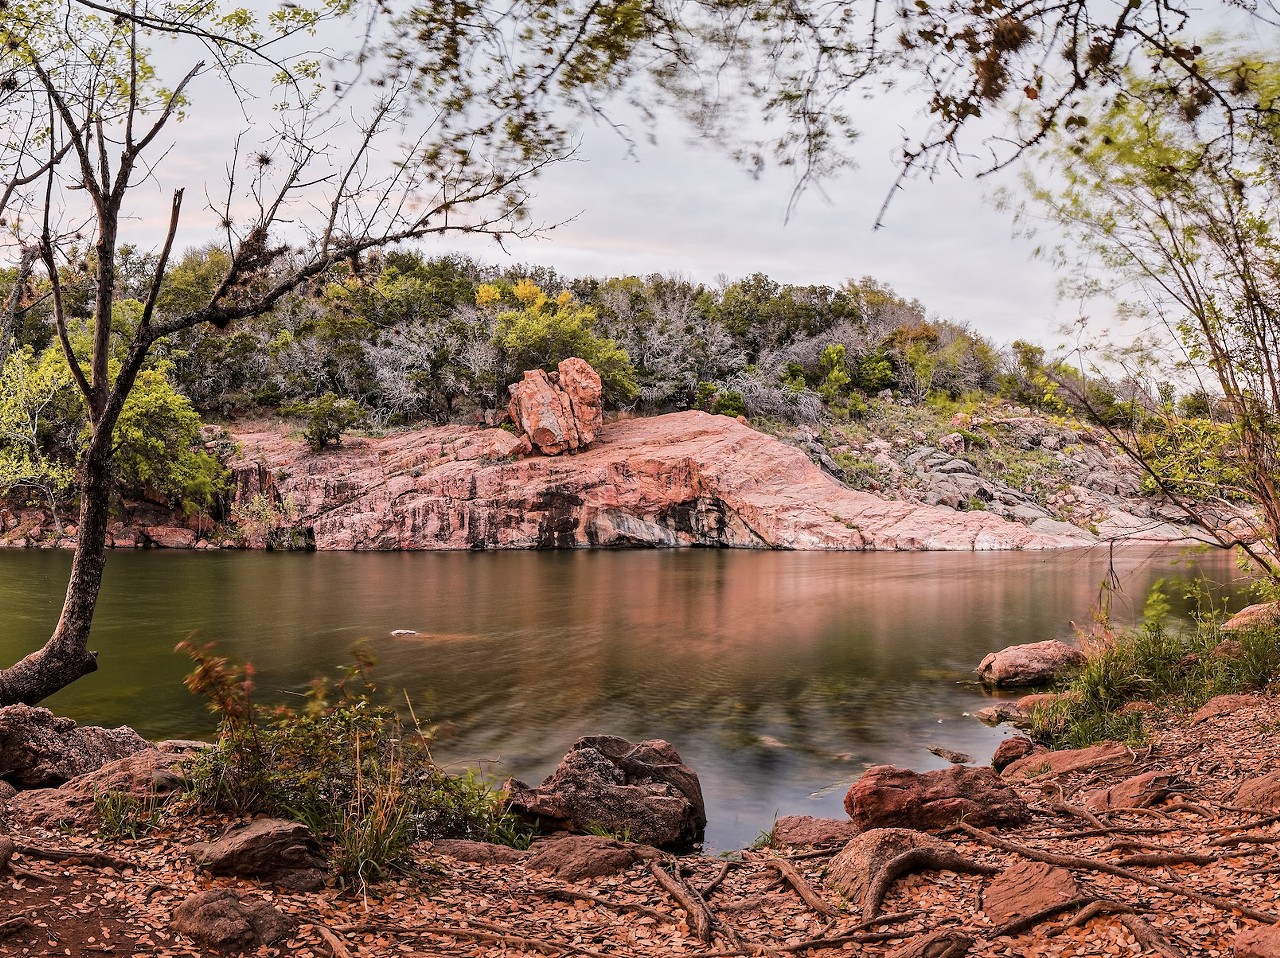 Inks Lake State Park
3630 Park Road 4 West, Burnet, (512) 793-2223, tpwd.texas.gov
North of Austin, Inks Lake is a prime spot to appreciate nature. With a variety of trees and plants — cedar, live oak, prickly pear cacti and yucca — the landscape is absolutely gorgeous. Park-goers can enjoy camping, backpacking, picnicking and hiking. Just make it a point to swing by the Devil’s Waterhole for some scenic waterfall views.